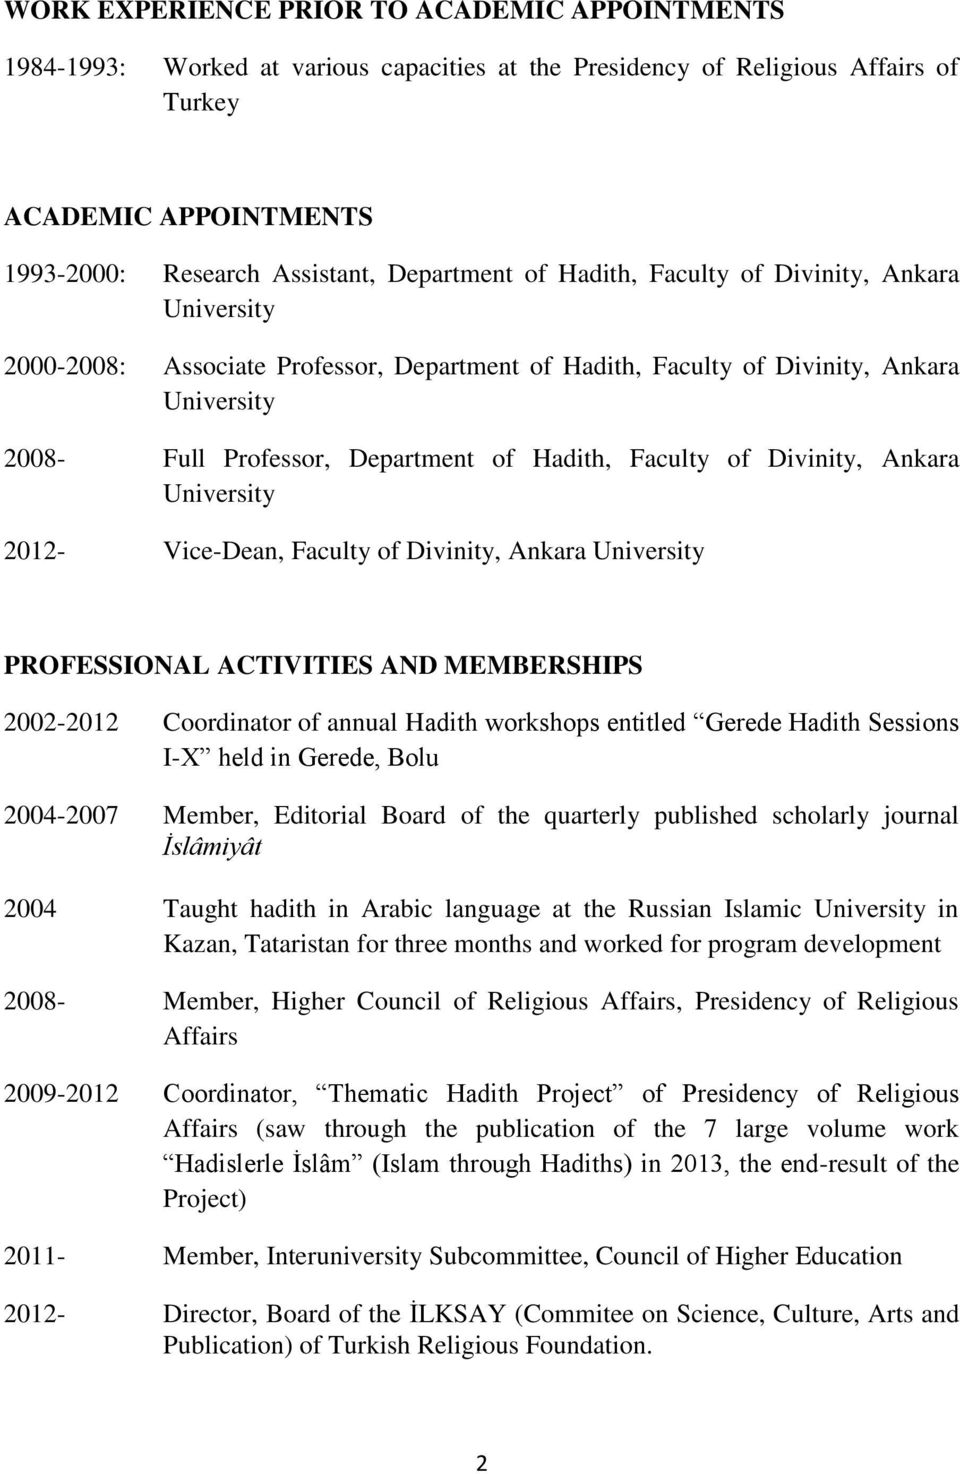 Divinity, Ankara University 2012- Vice-Dean, Faculty of Divinity, Ankara University PROFESSIONAL ACTIVITIES AND MEMBERSHIPS 2002-2012 Coordinator of annual Hadith workshops entitled Gerede Hadith